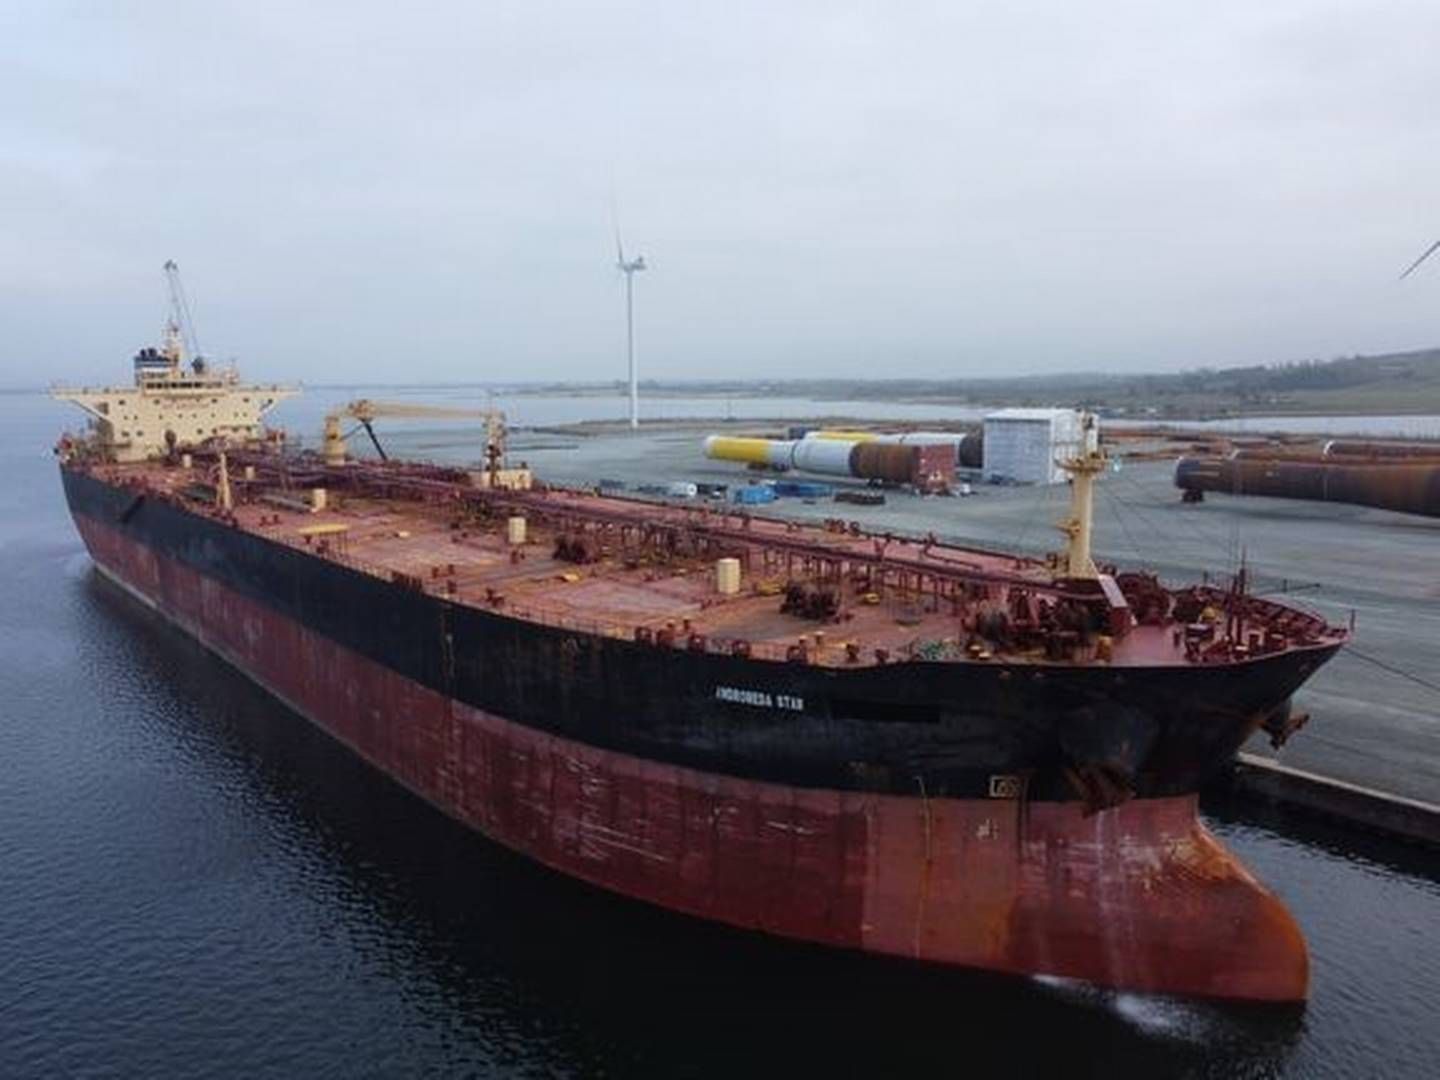 ”Worn-out and rusty oil tankers in Danish waters must be stopped immediately and before a serious accident occurs. Hope is not a strategy,” wrote Greenpeace in a statement accompanying this photo of the vessel Andromeda Star. | Photo: Greenpeace